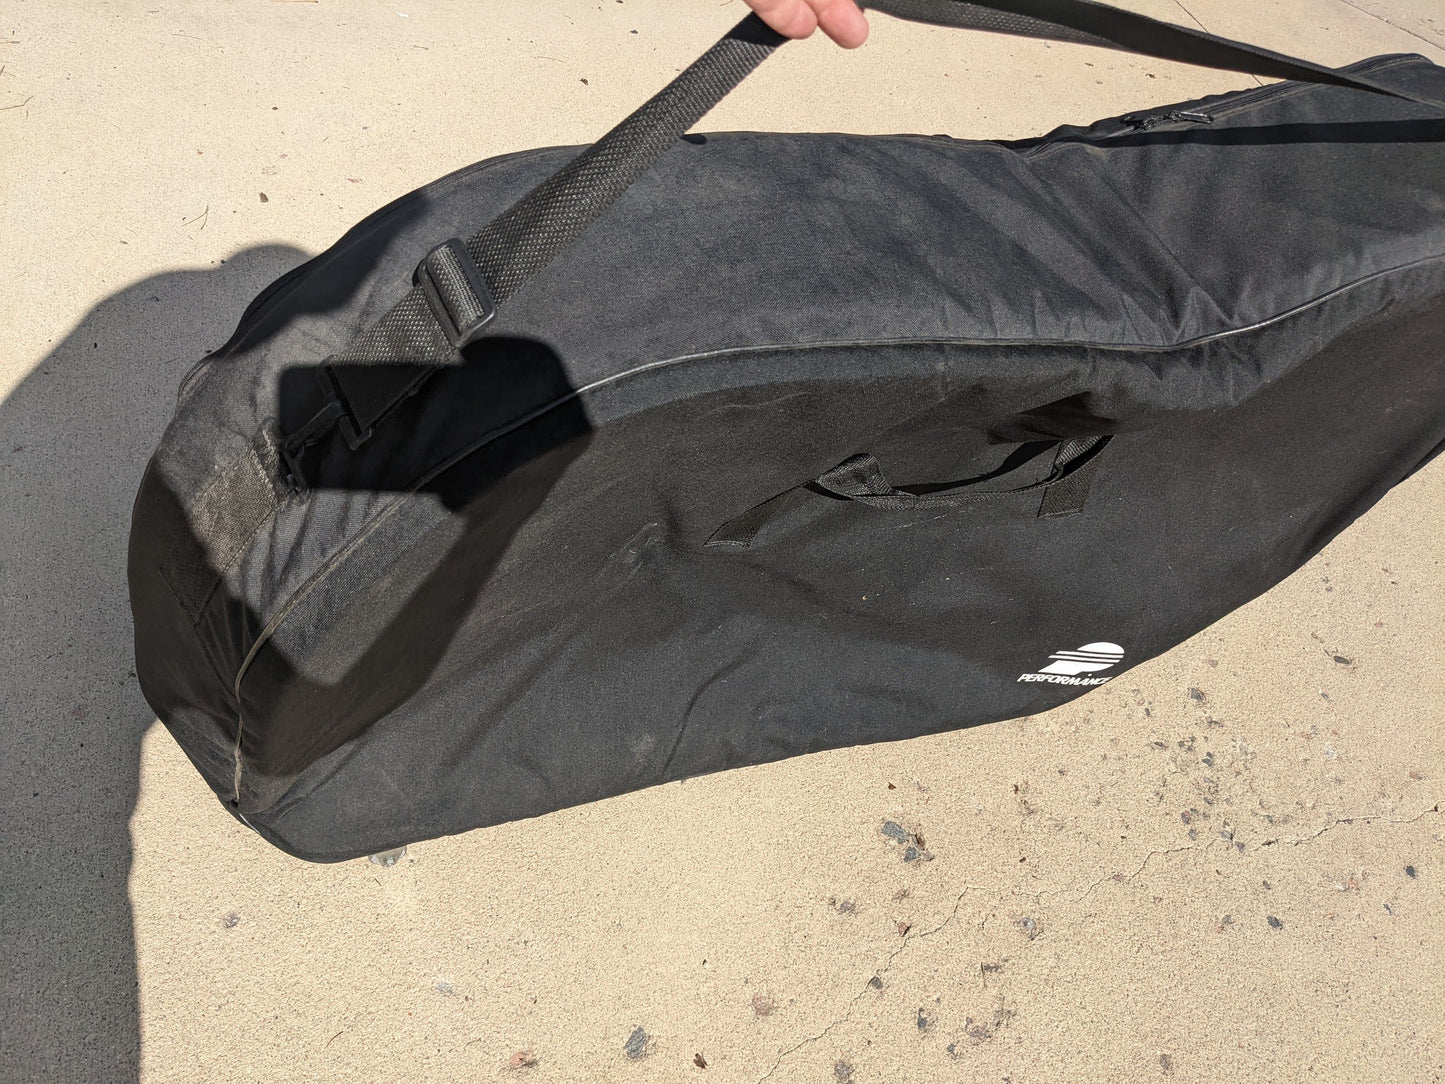 Performance Bike Carrier Bag Size 48 In x 32 In Black Used